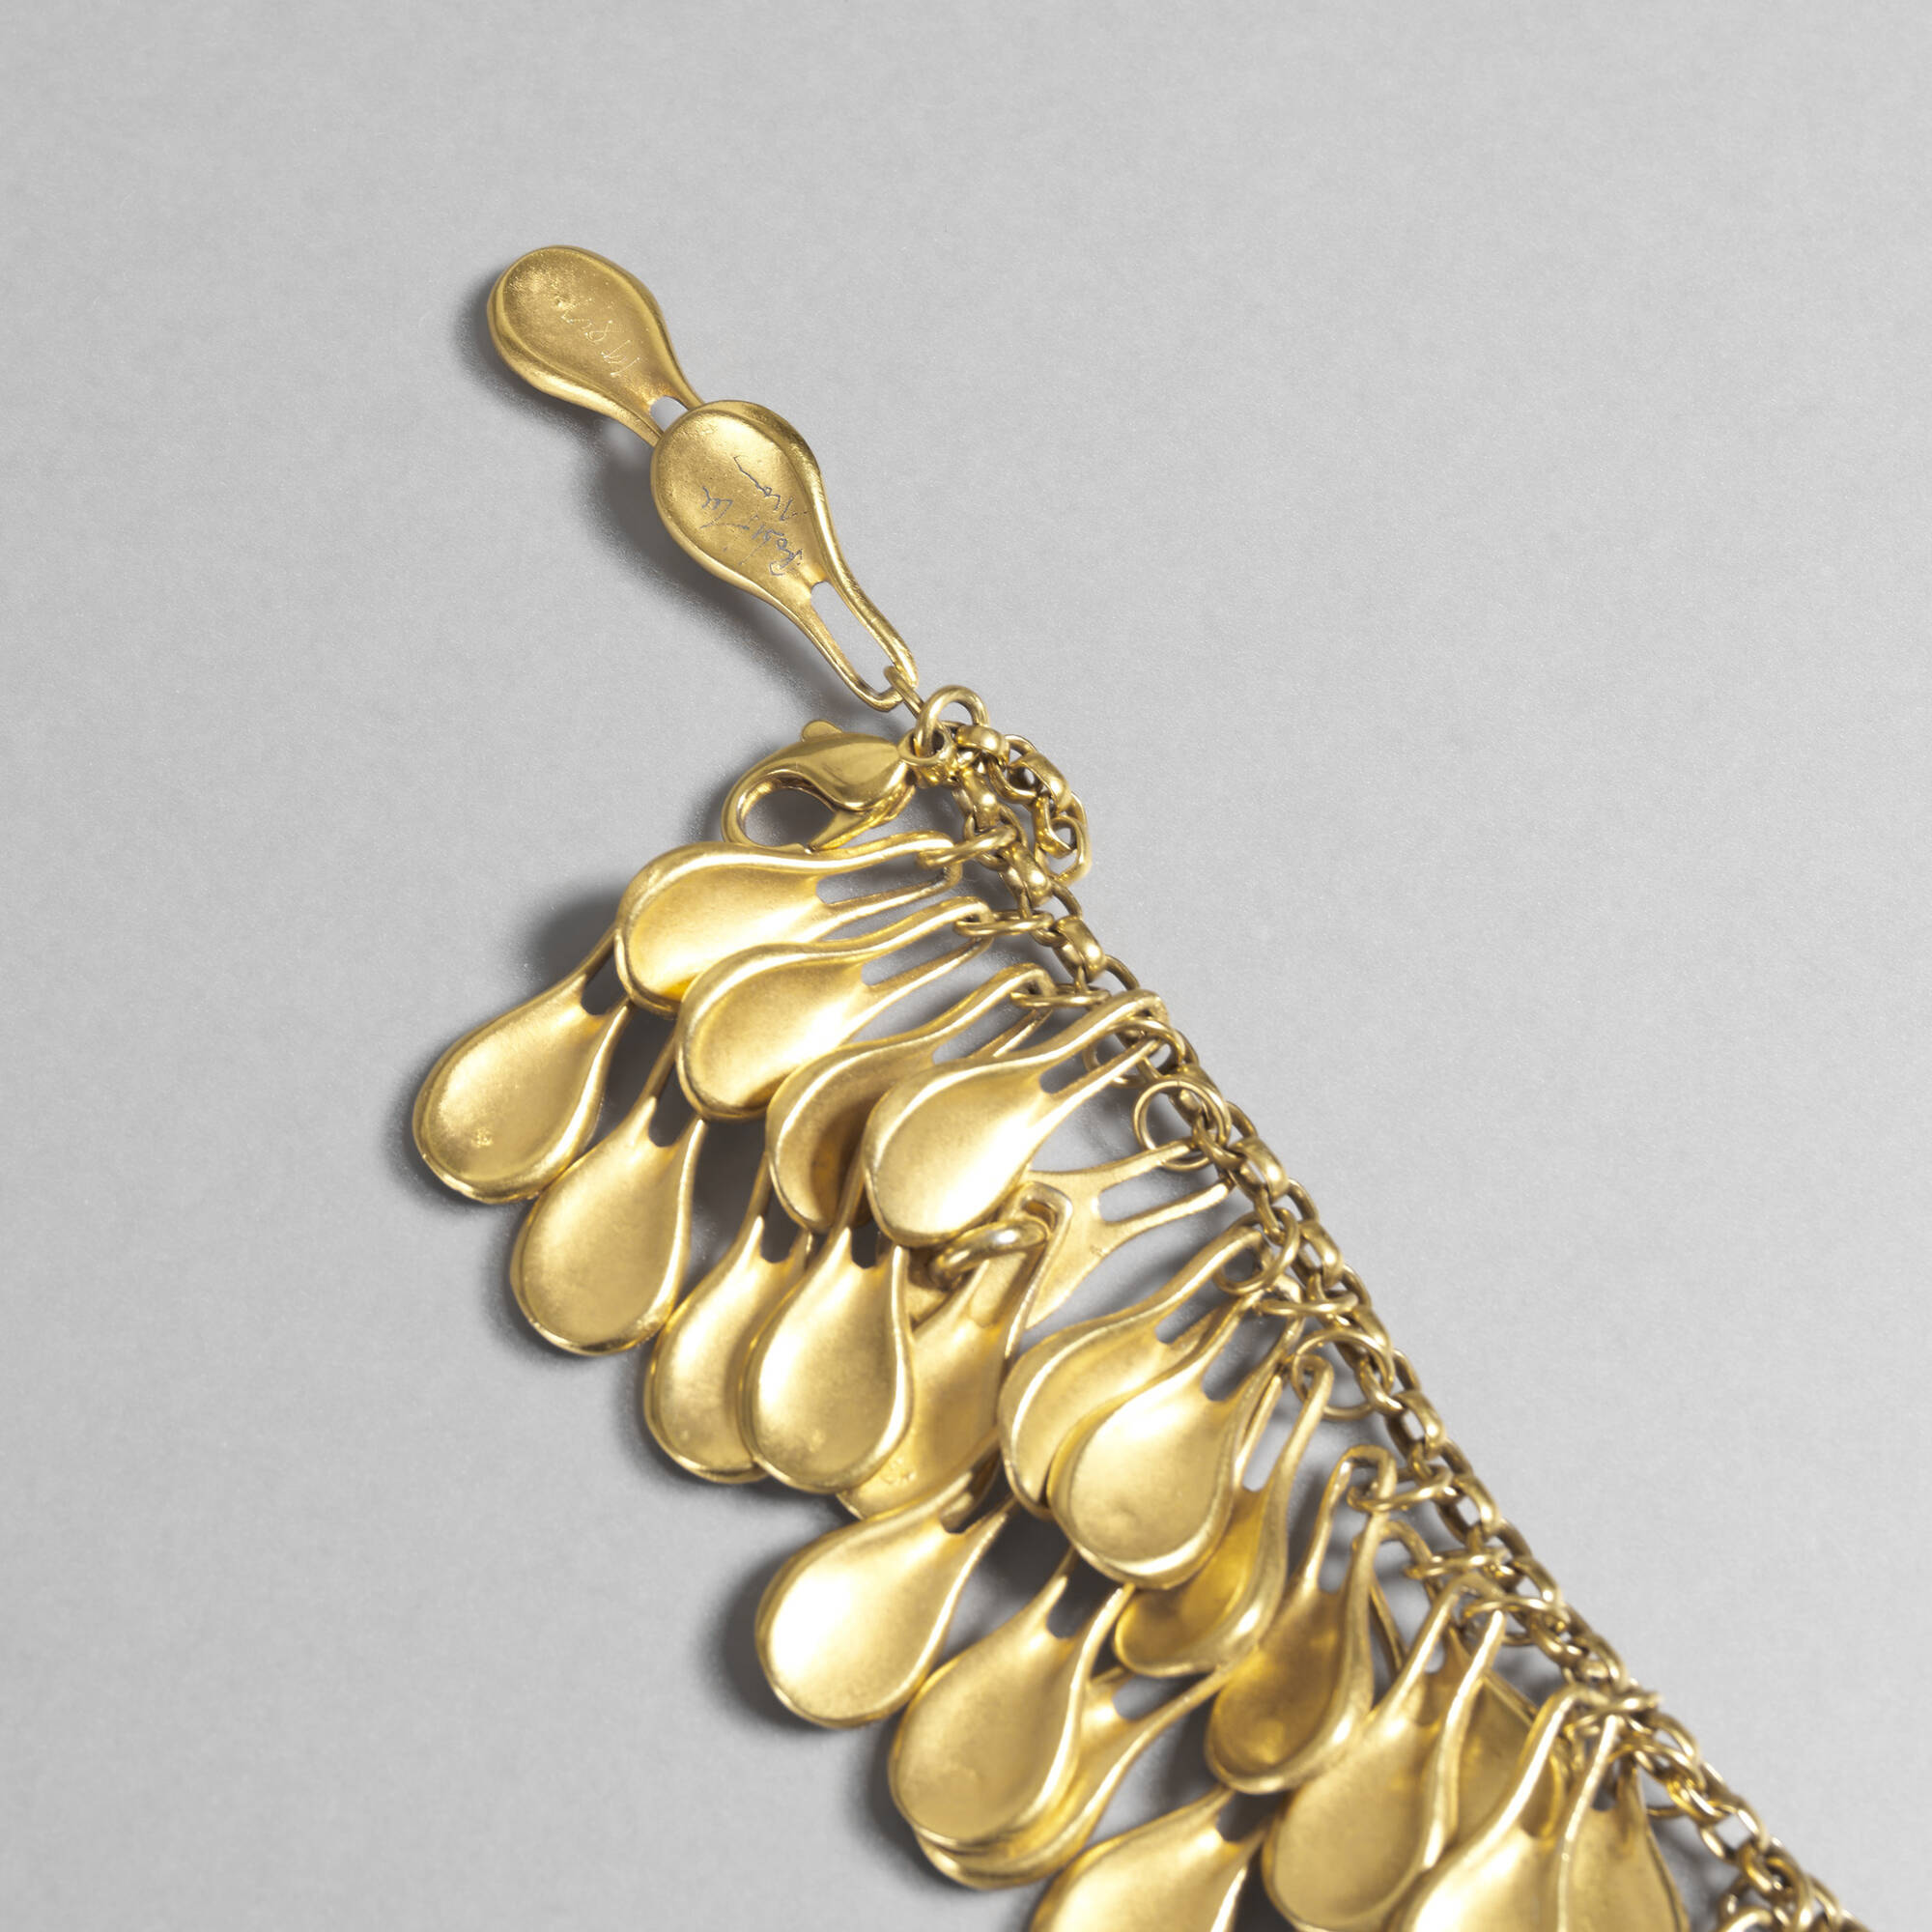 577: ROBERT LEE MORRIS, Golden Petal Waterfall necklace < Objet, 6 June  2019 < Auctions | Wright: Auctions of Art and Design